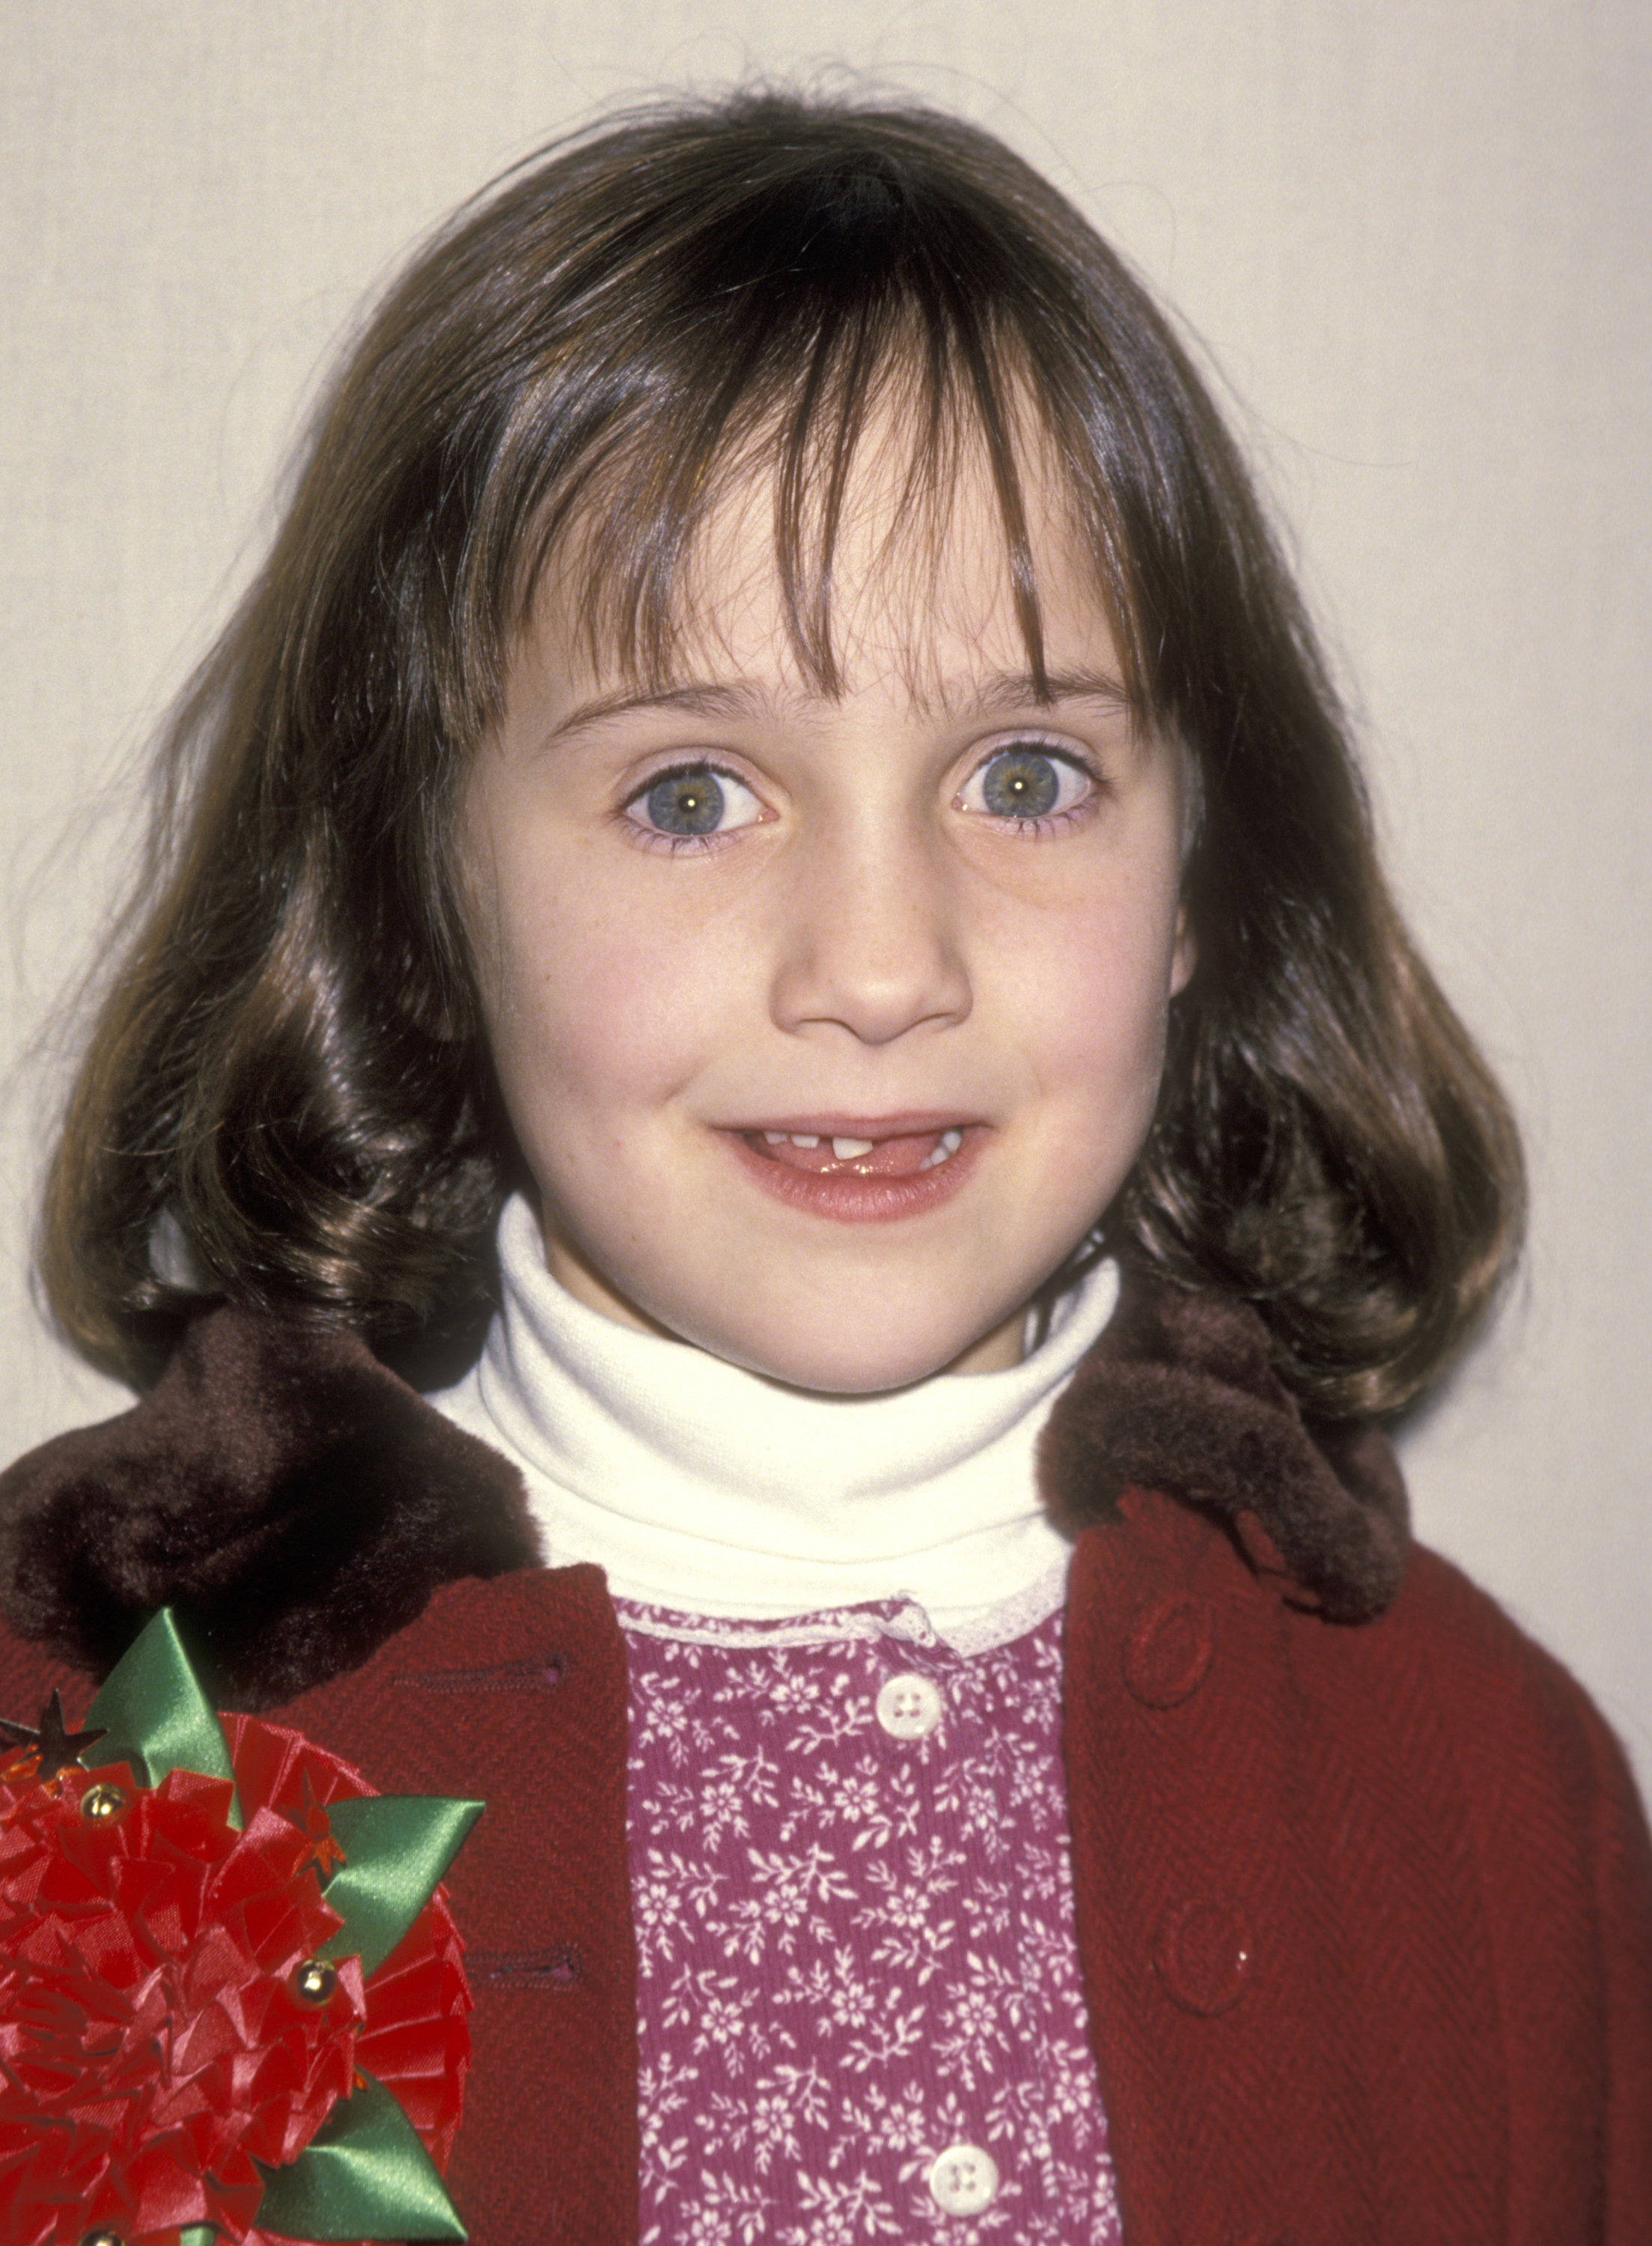 Mara Wilson attends the 63rd Annual Hollywood Christmas Parade at KTLA Studios on November 27, 1994 in Hollywood, California. | Source: Getty Images